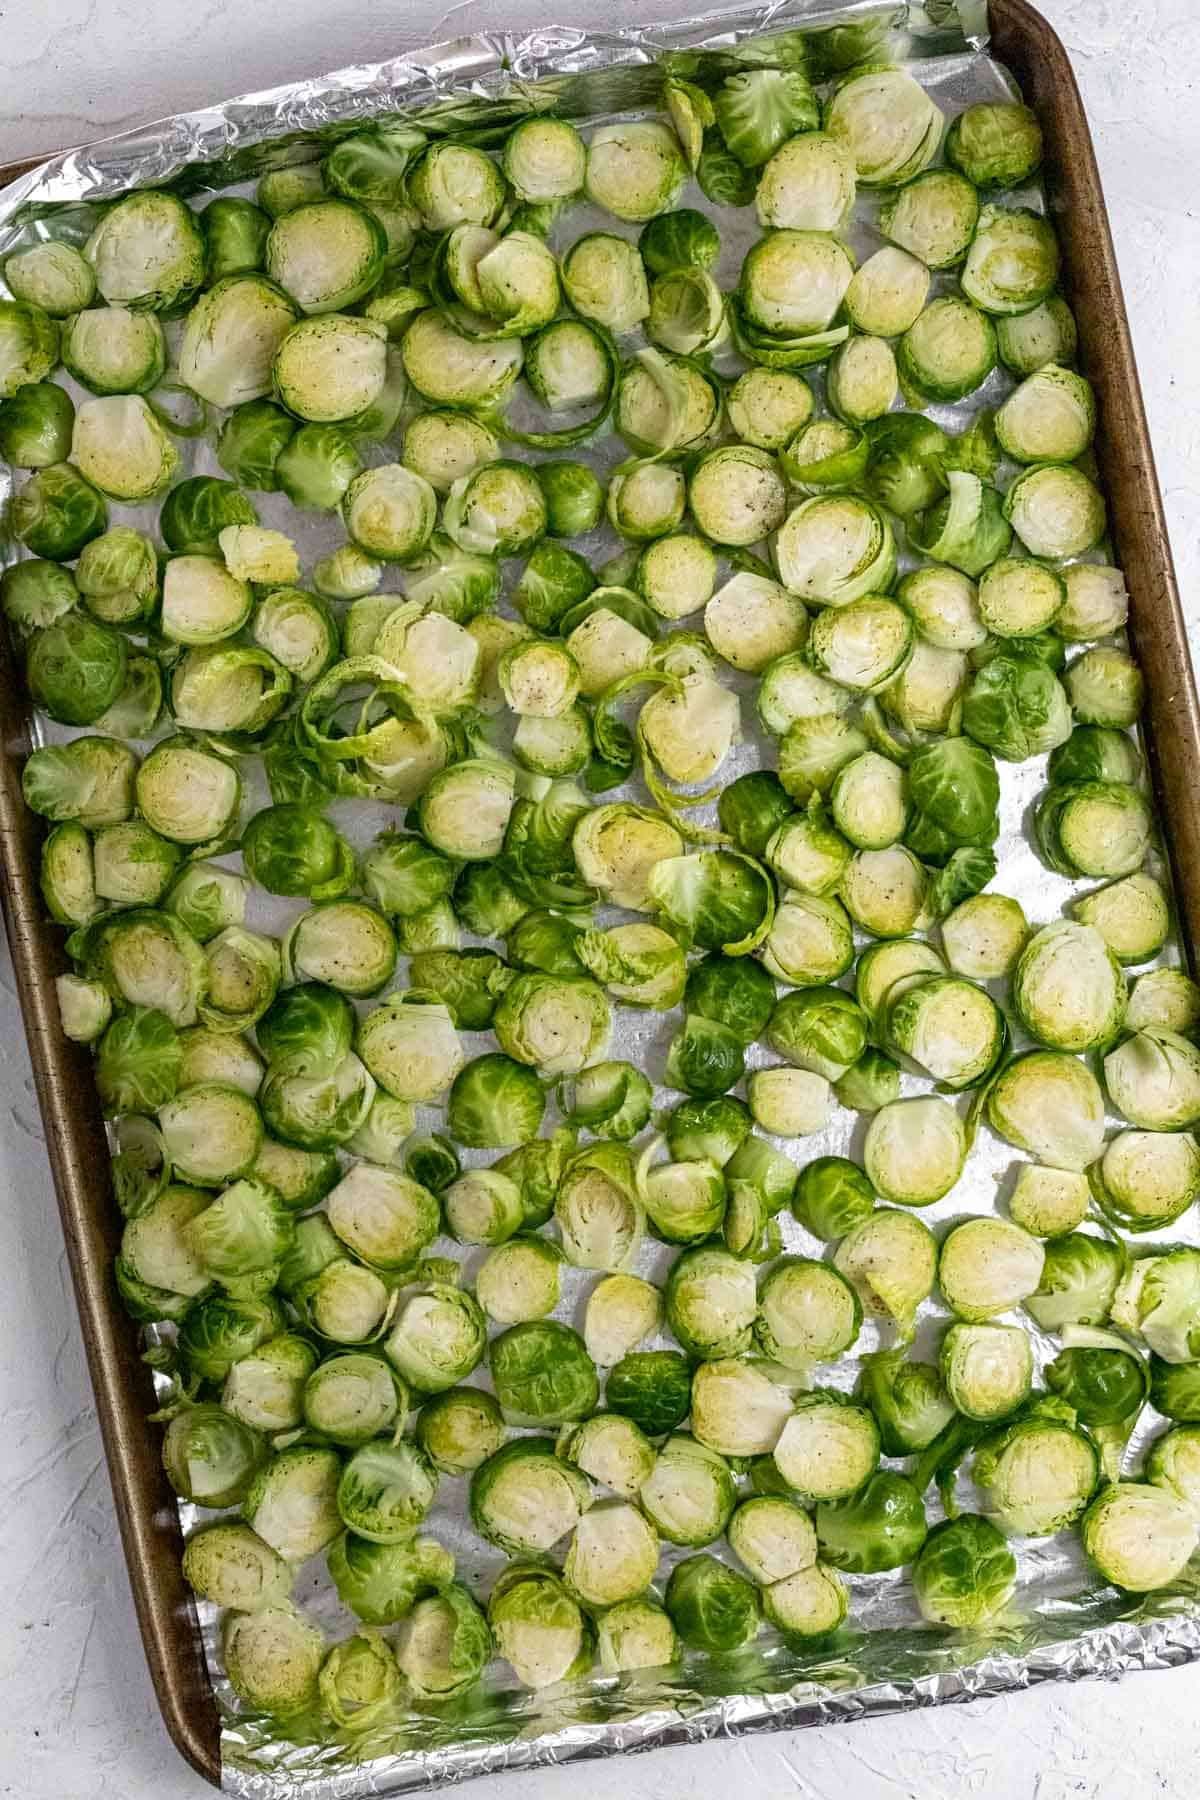 Sliced brussels sprouts on a sheet pan before going in the oven.